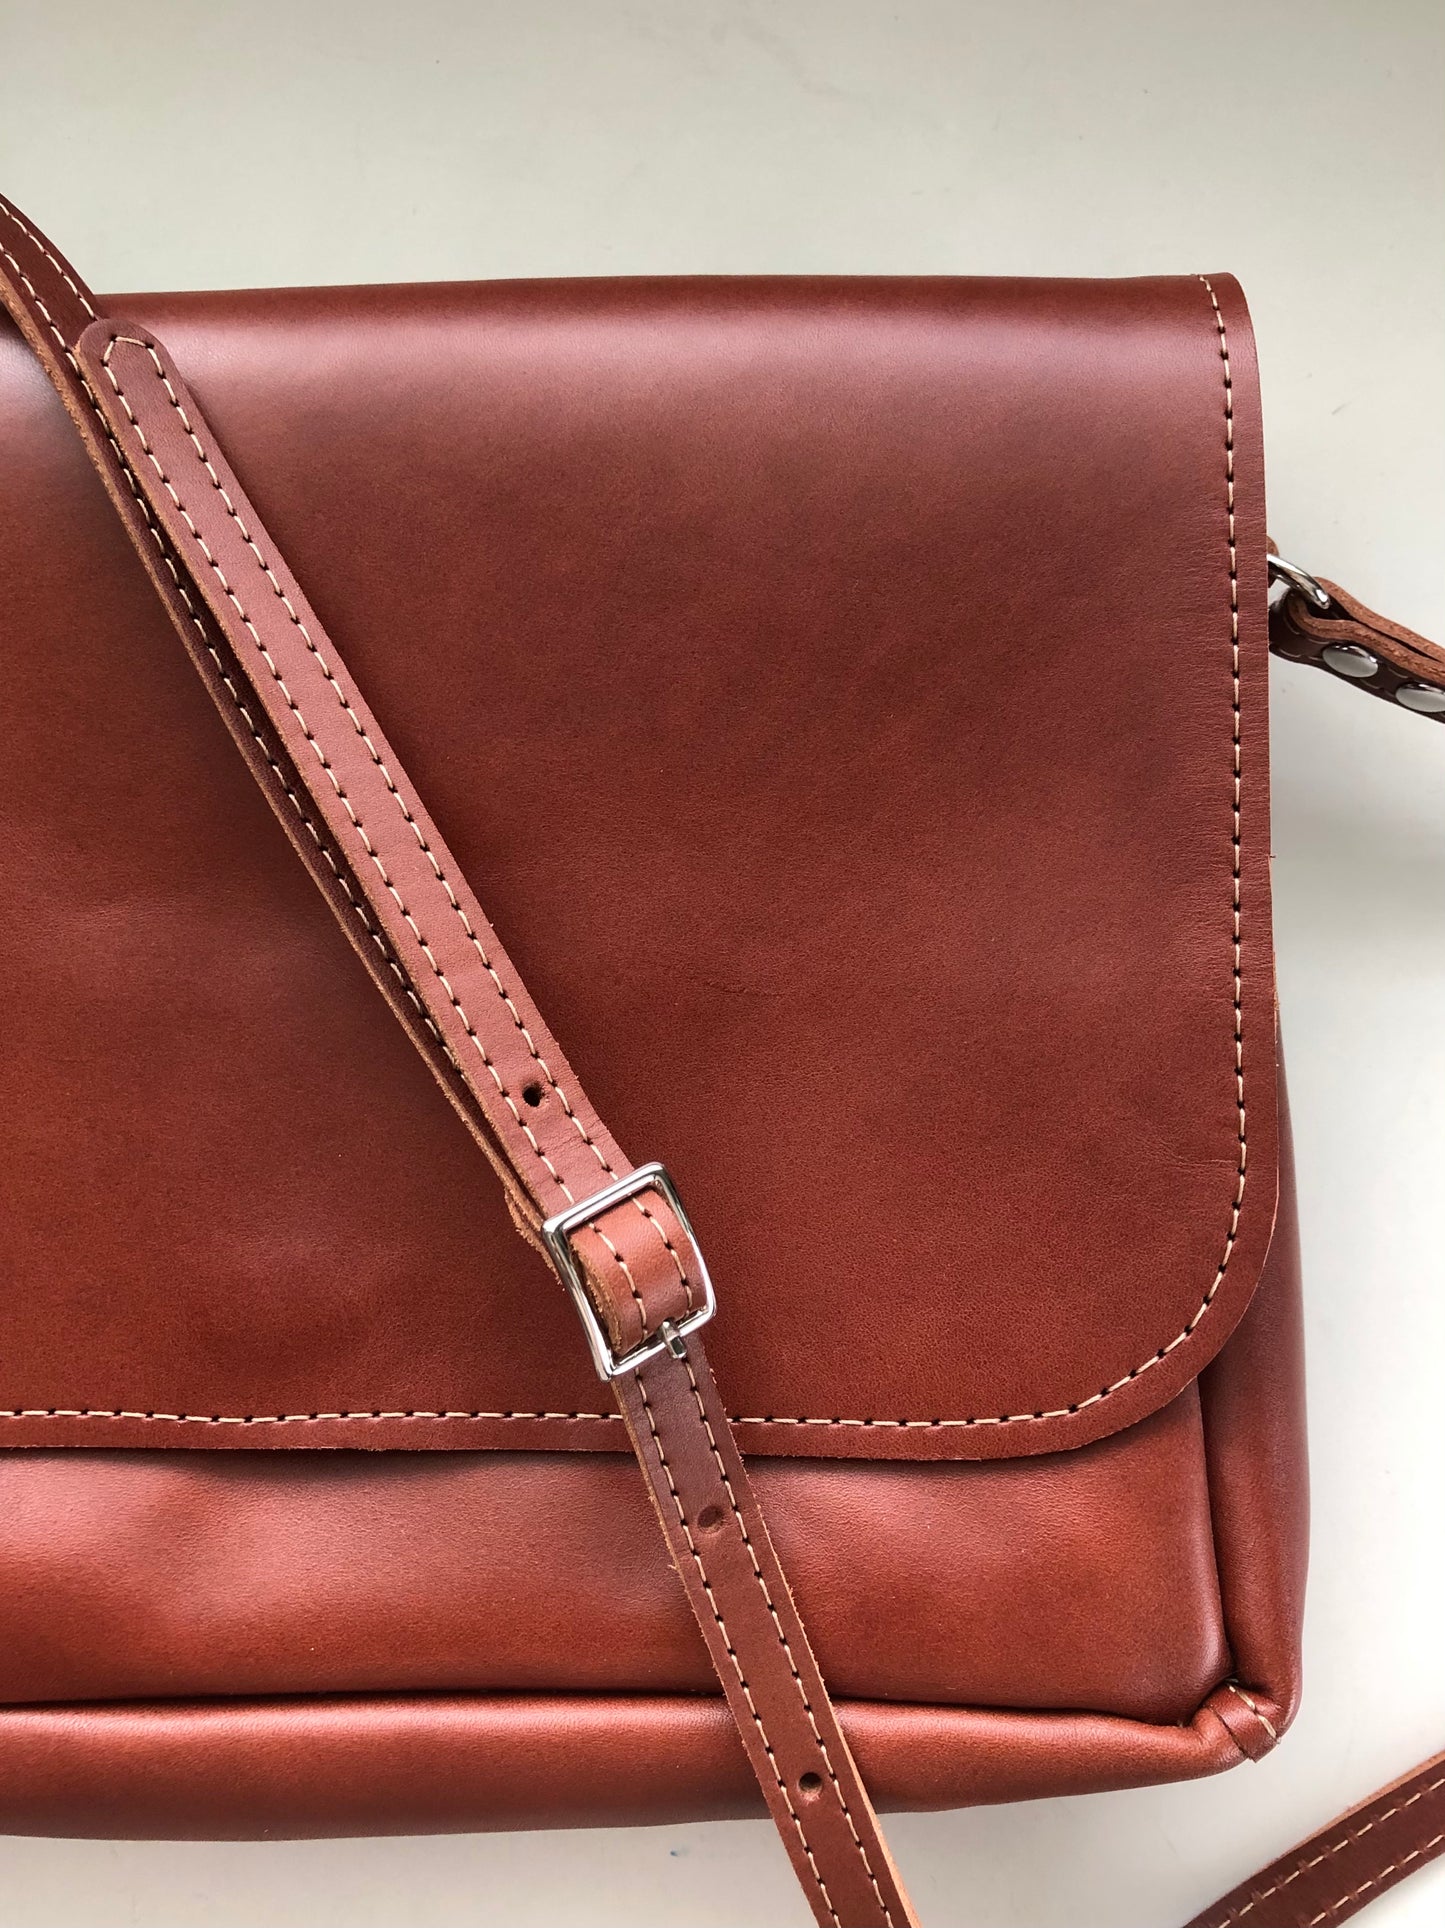 Handcrafted Leather Bag | Buttery Leather Crossbody Bag | Everyday Leather Purse